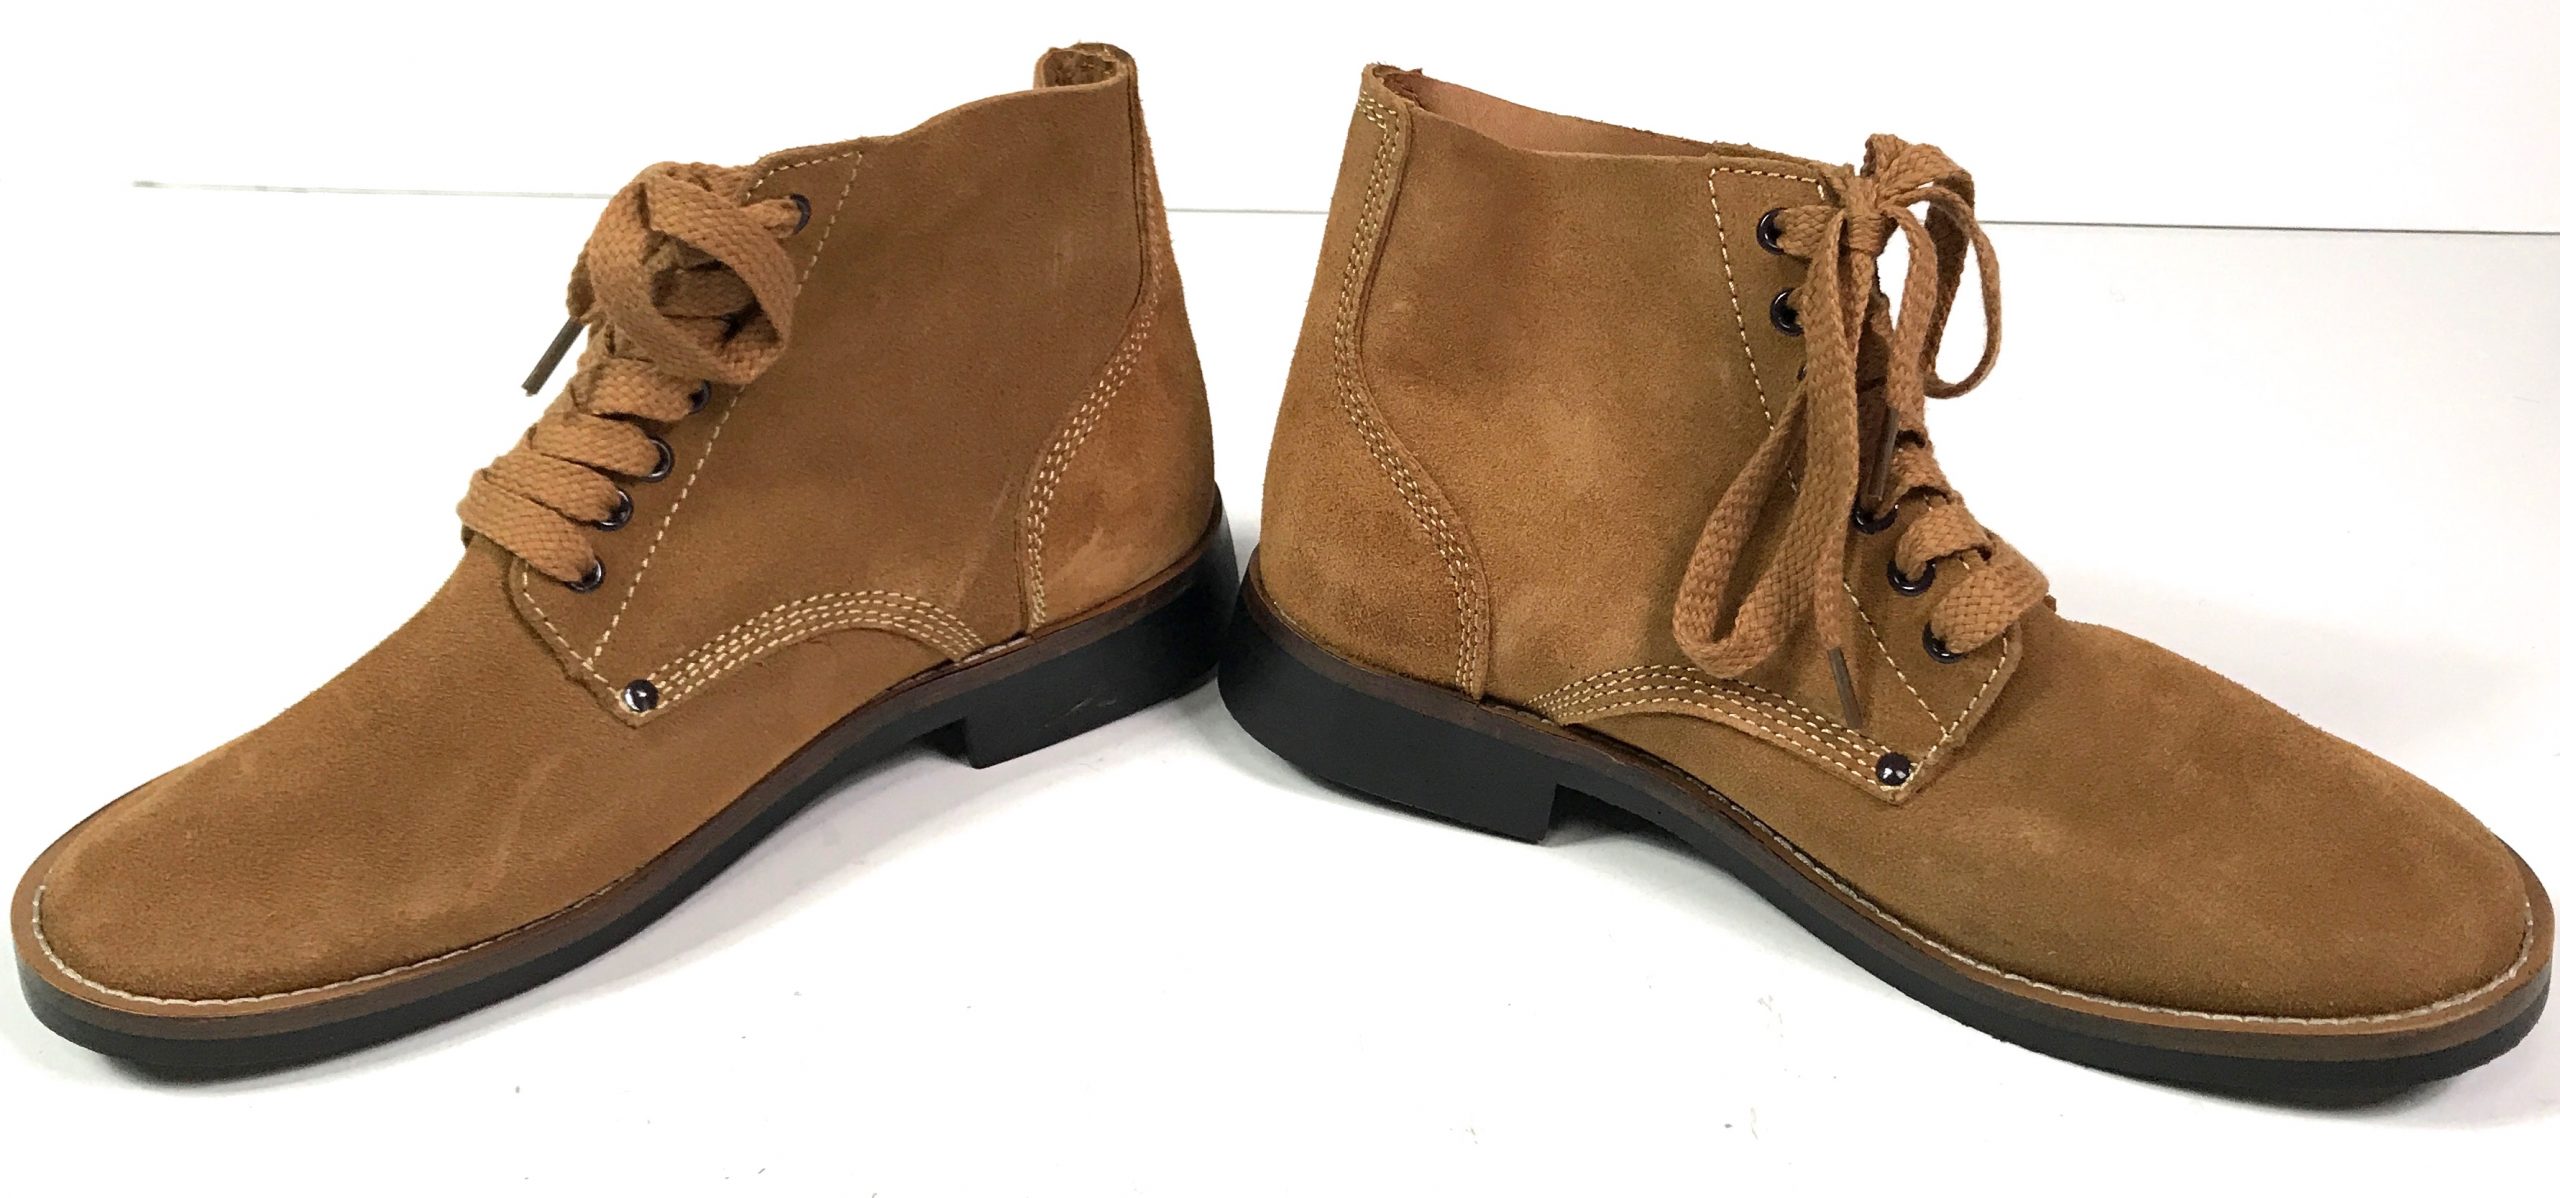 RUSSETS TYPE II “ROUGHT OUTS” COMBAT FIELD BOOTS | Man The Line